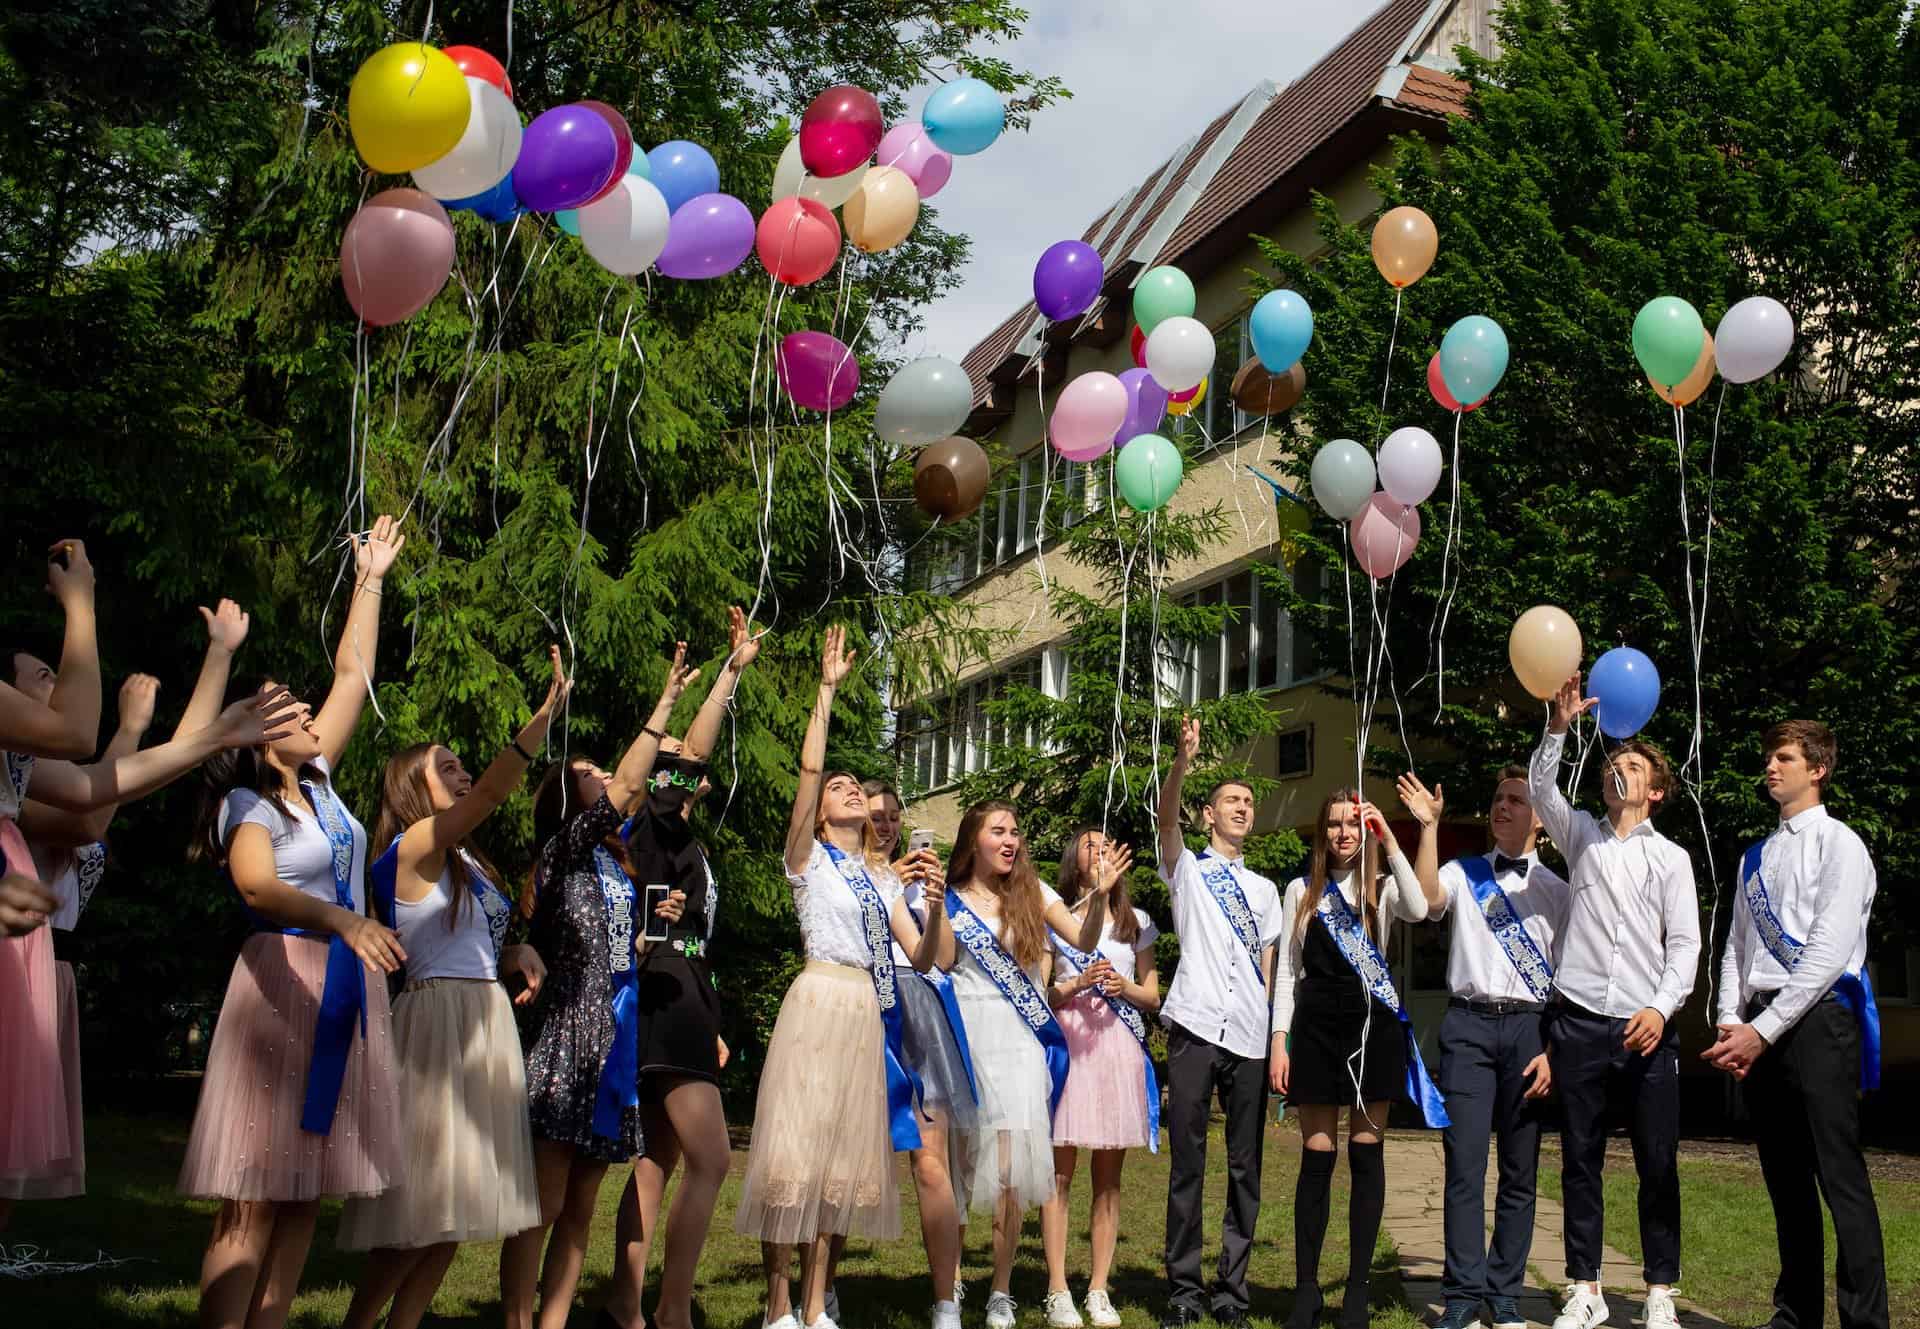 Group of graduates having fun at their graduation party by releasing balloons